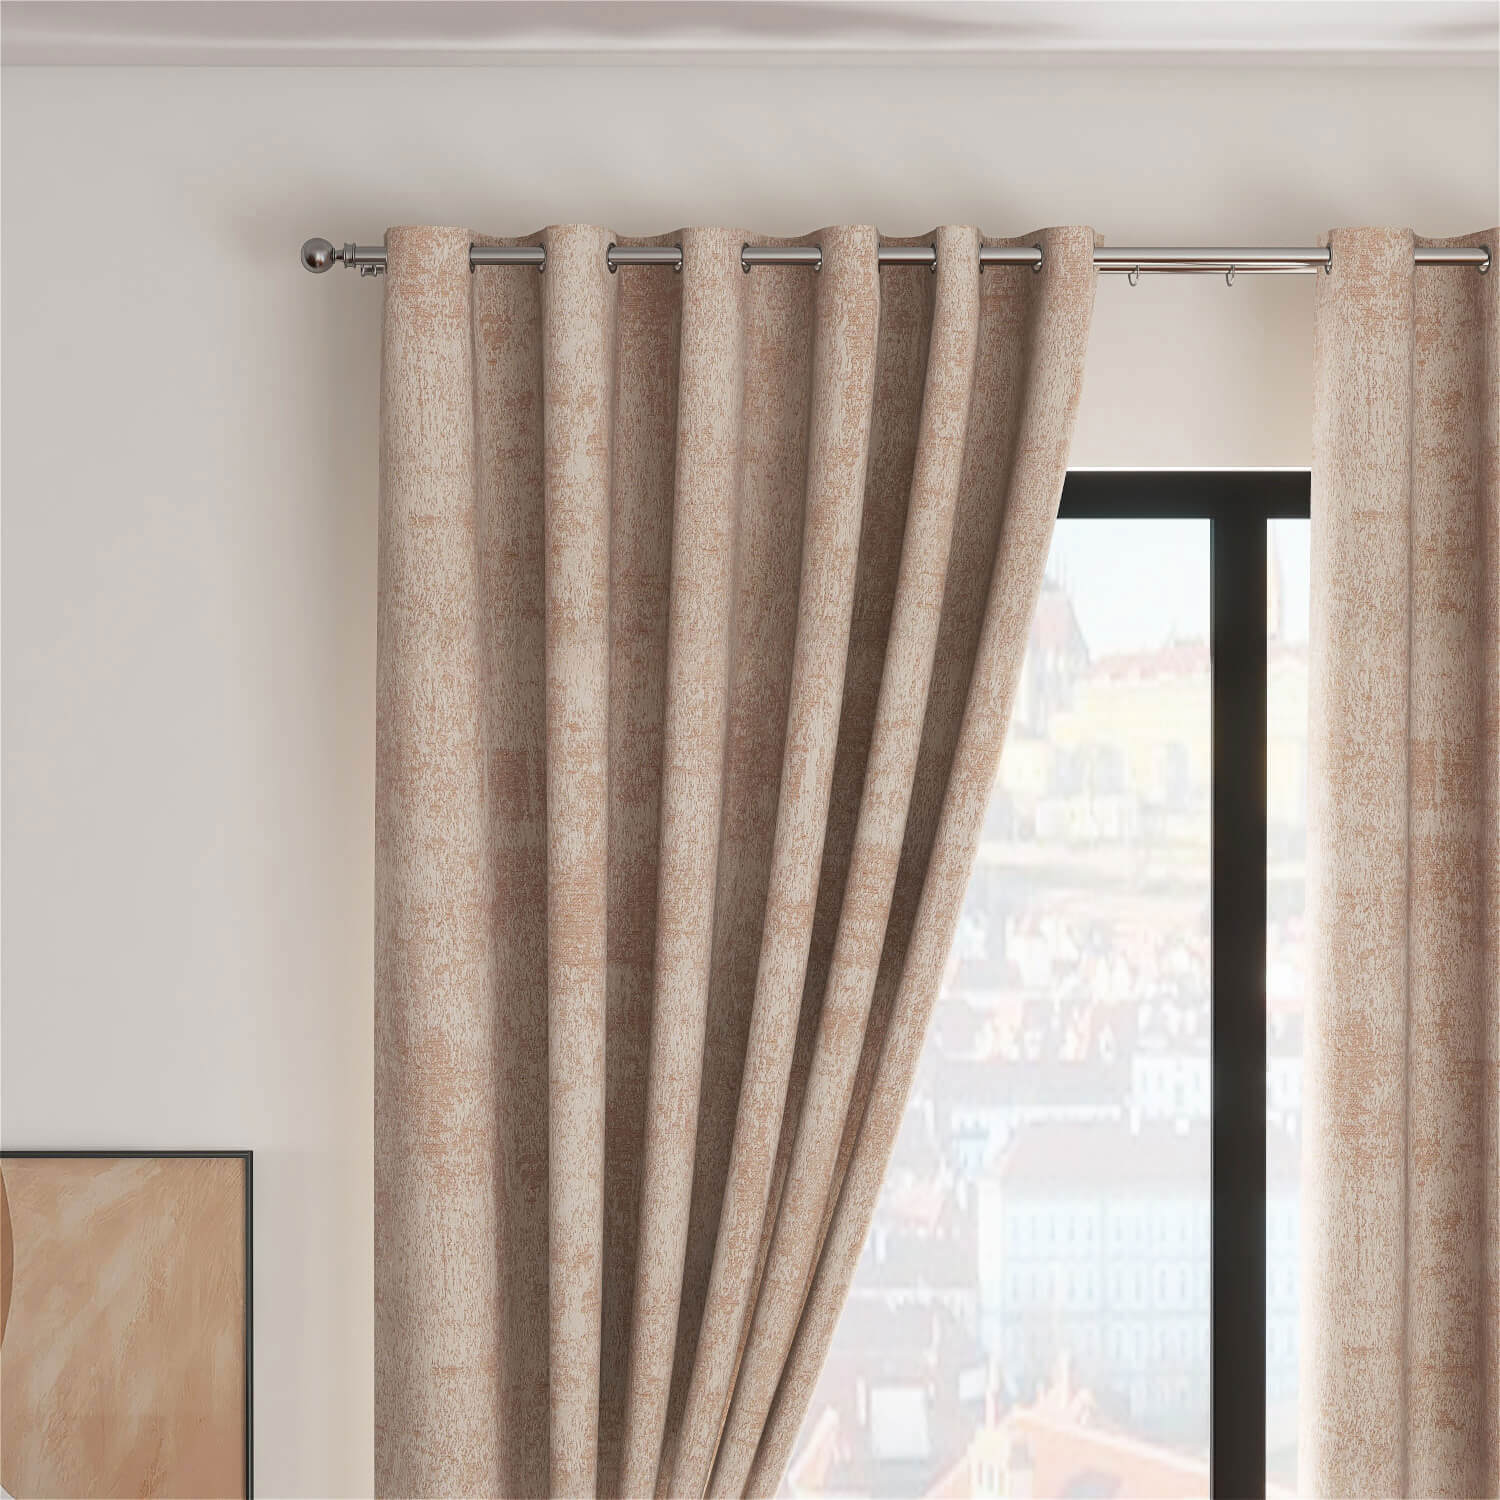 The Home Living Room Fiesta Ring Top Curtains - Sand 2 Shaws Department Stores